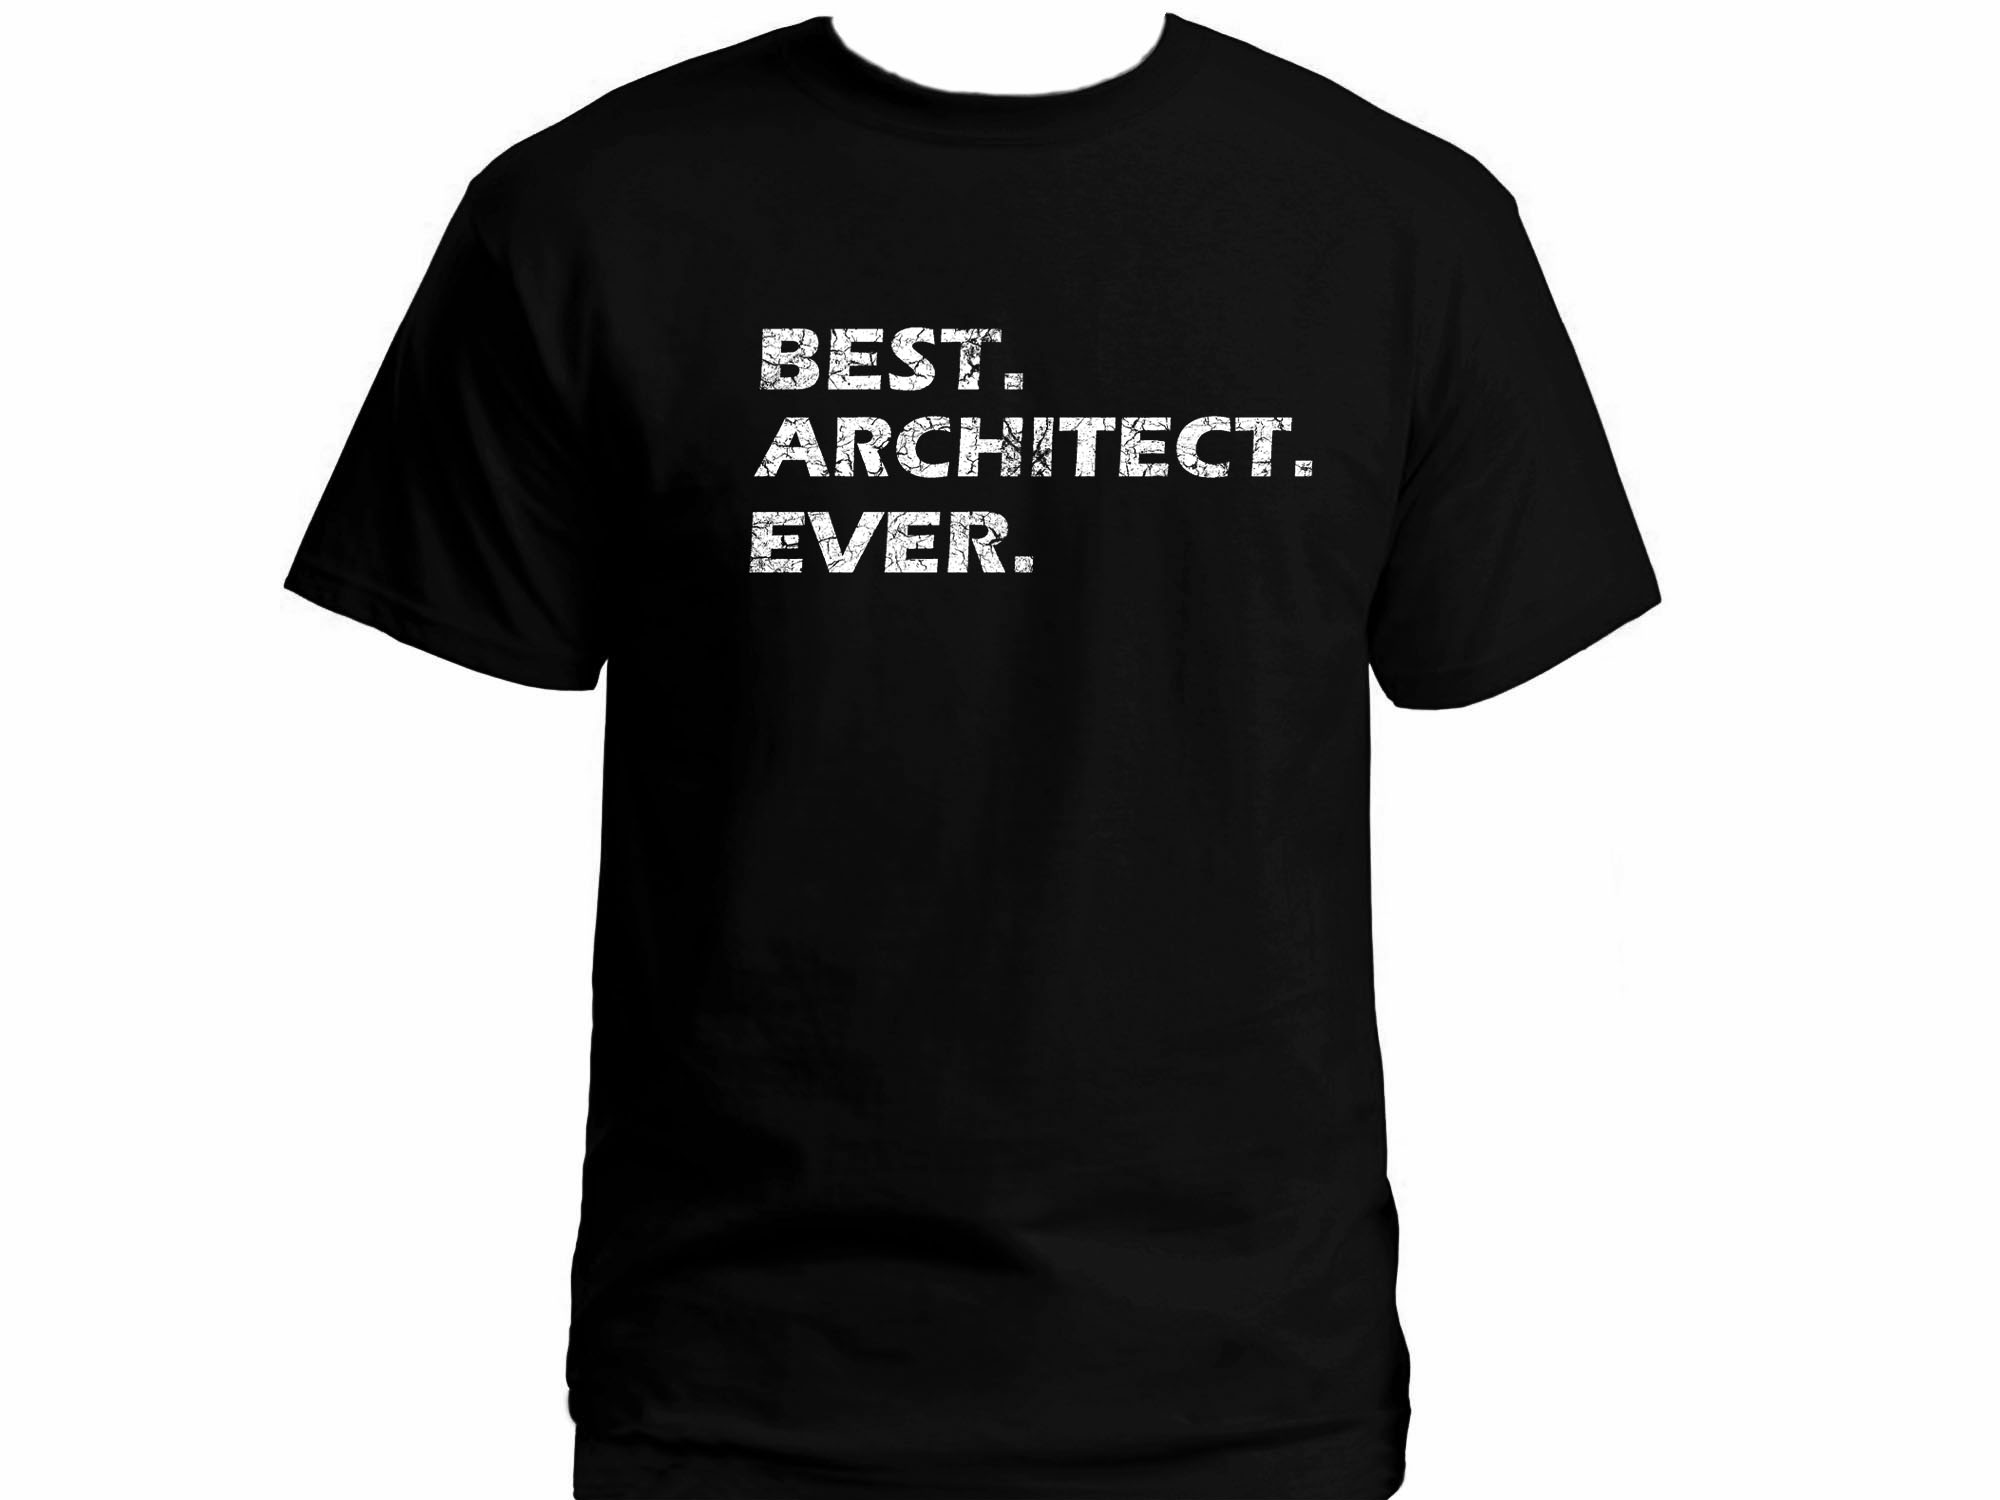 Best architect ever distressed print t-shirt